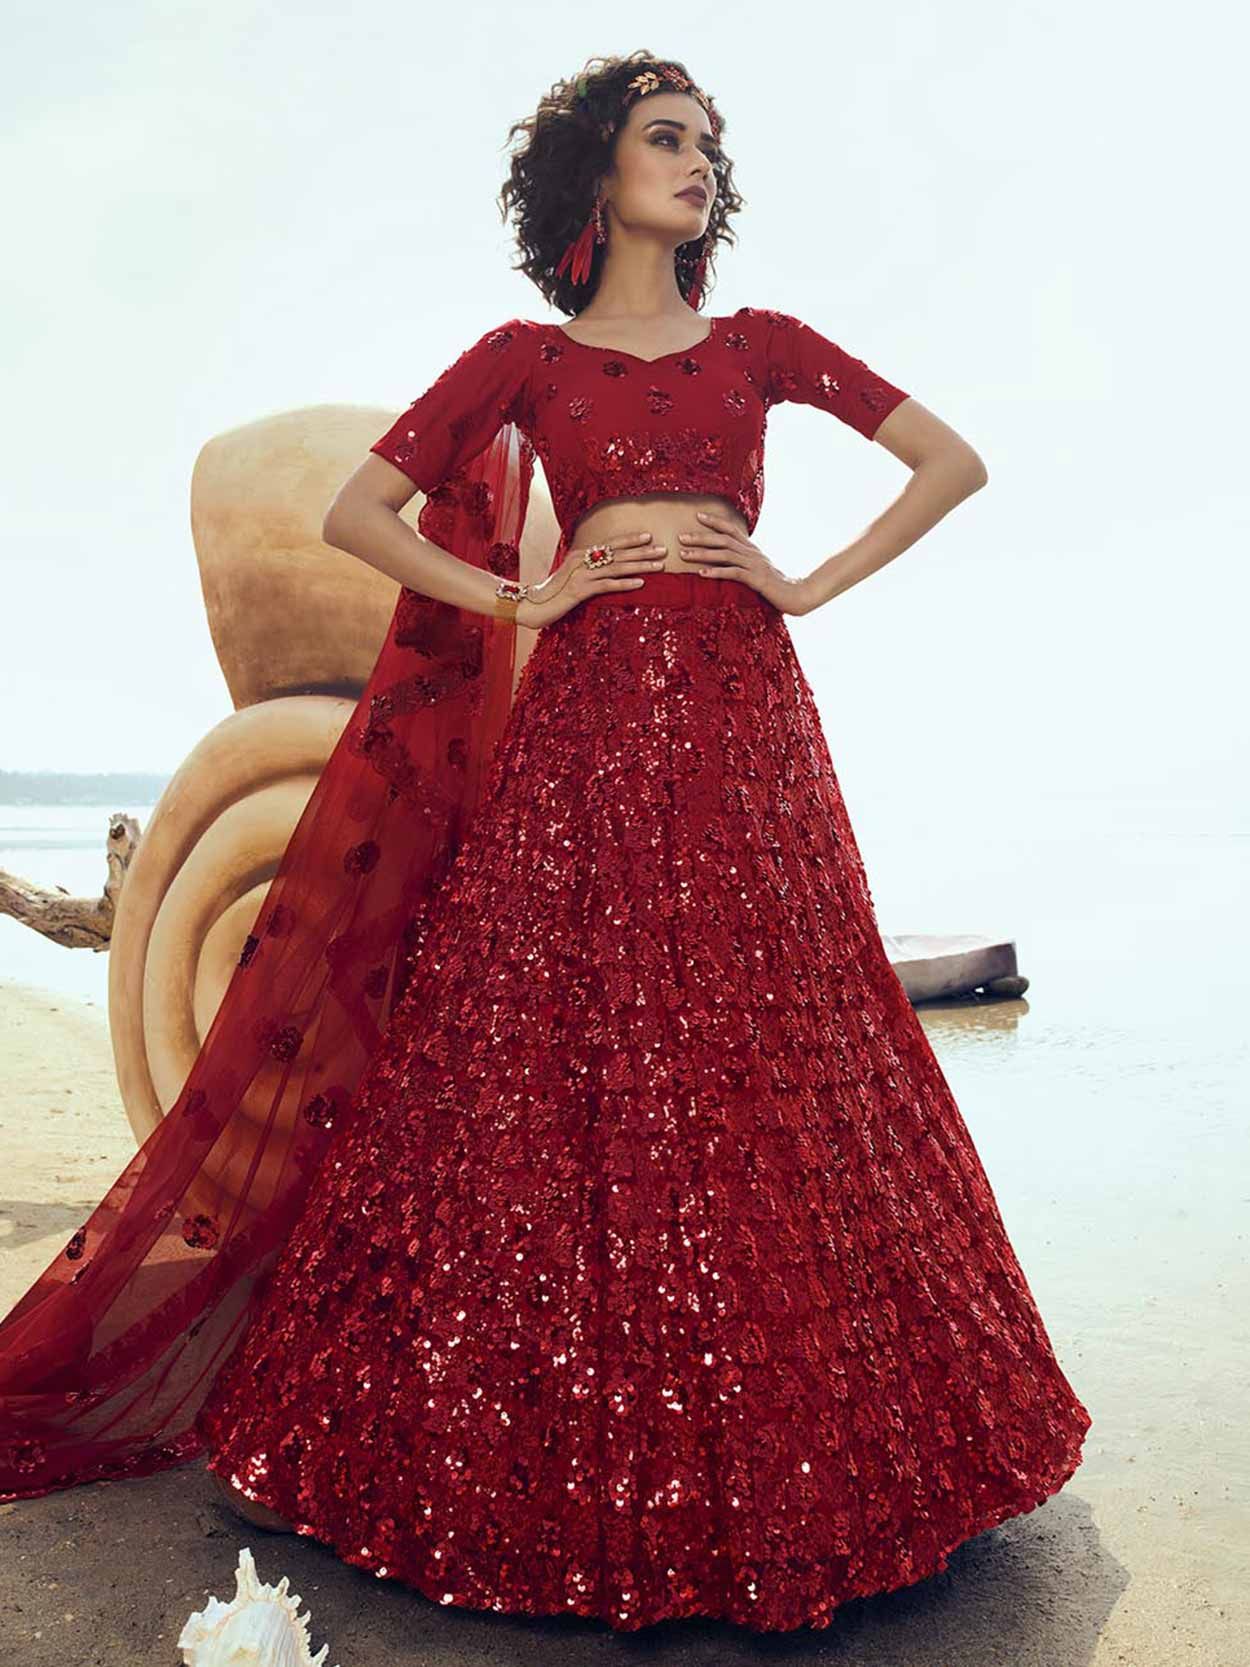 Bridal Lehengas in Blood Red Color of Zardozi Embroidered